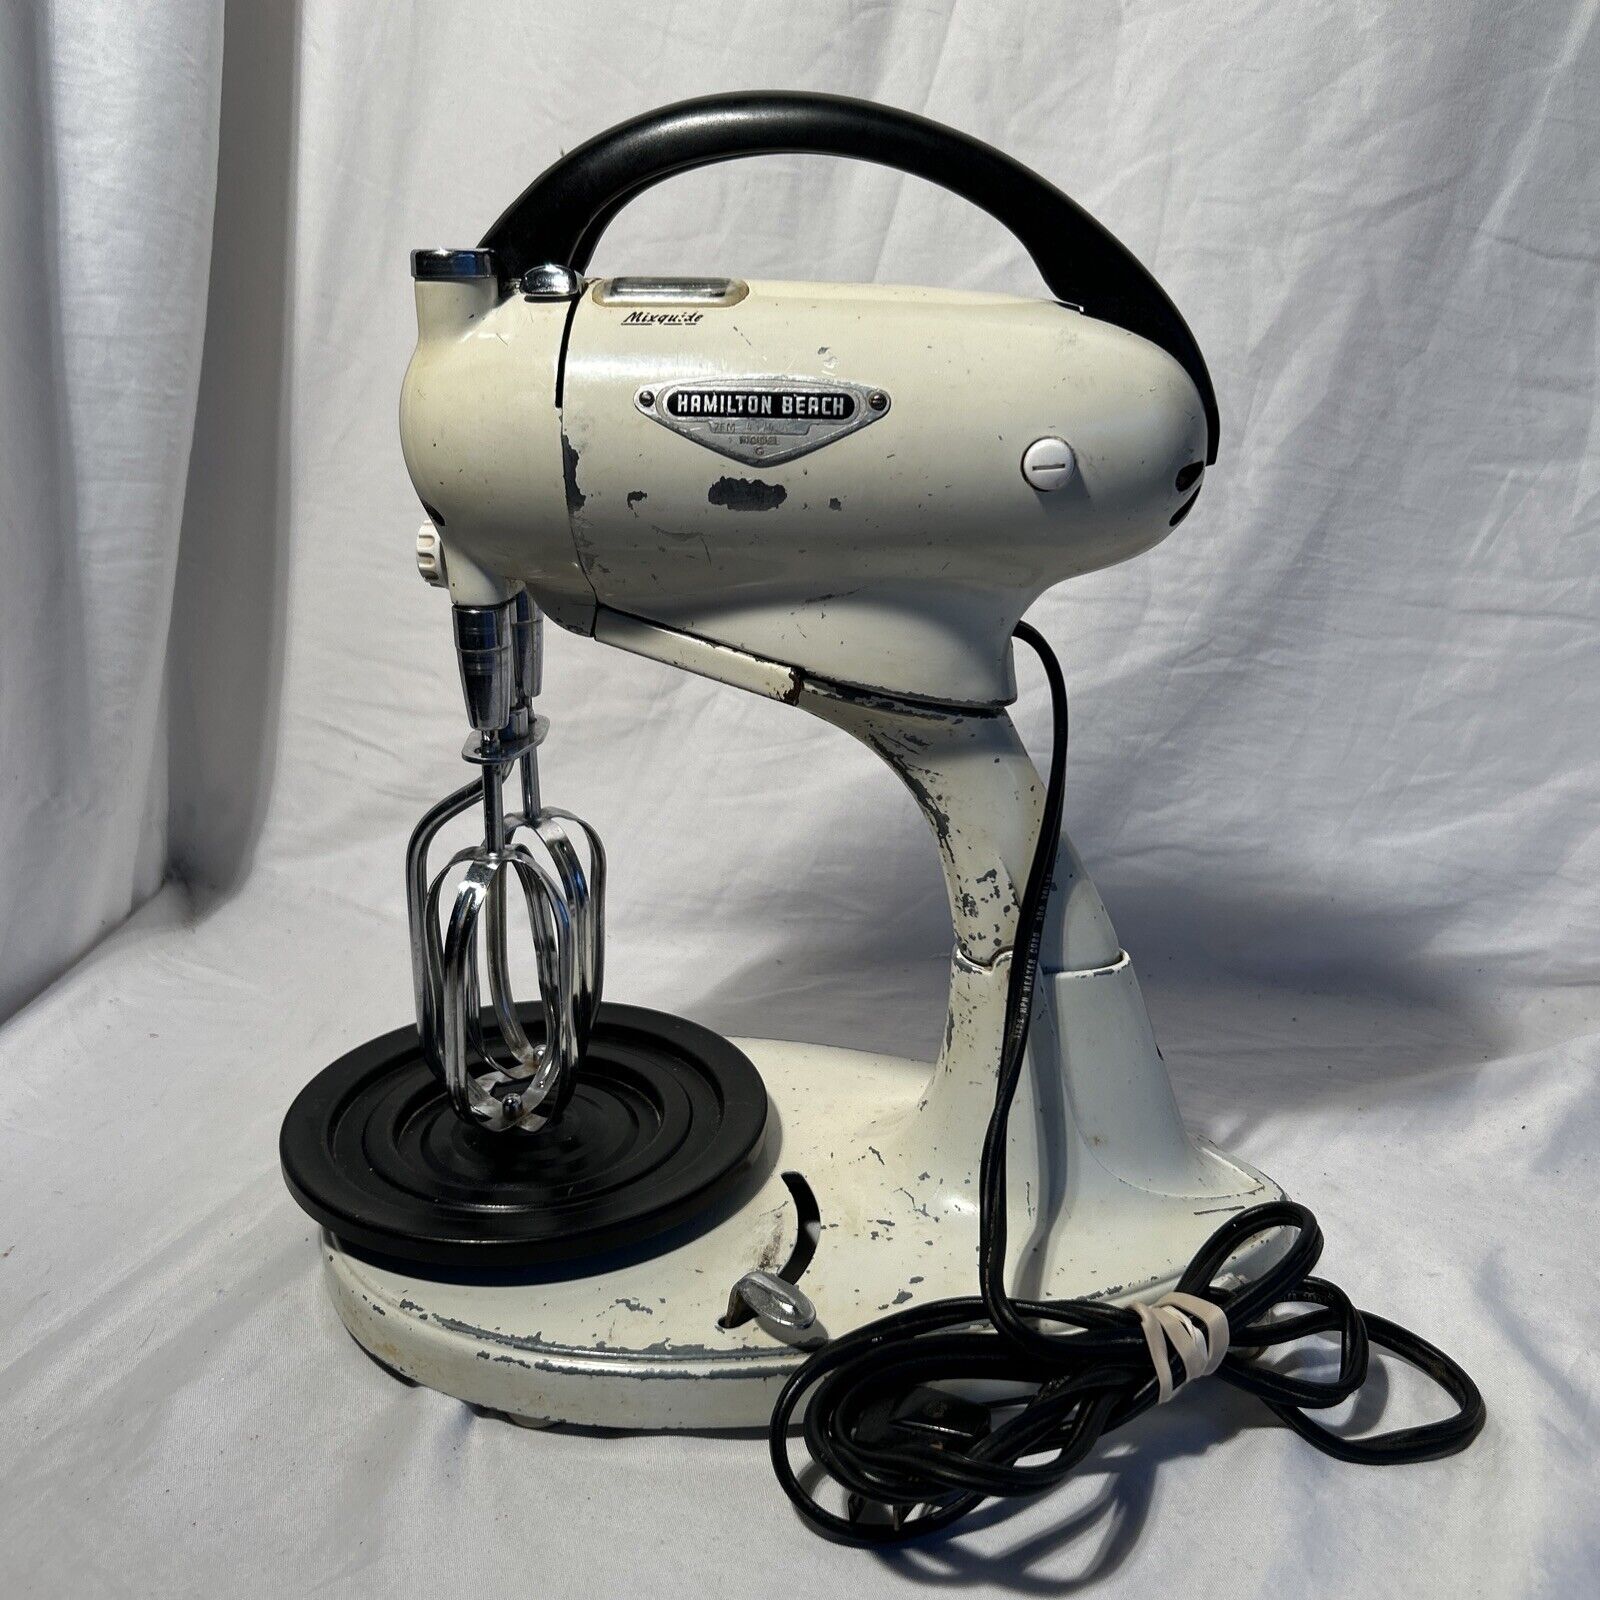 Vintage 1948 Hamilton Beach Model G Hand Mixer With Stand - WORKS